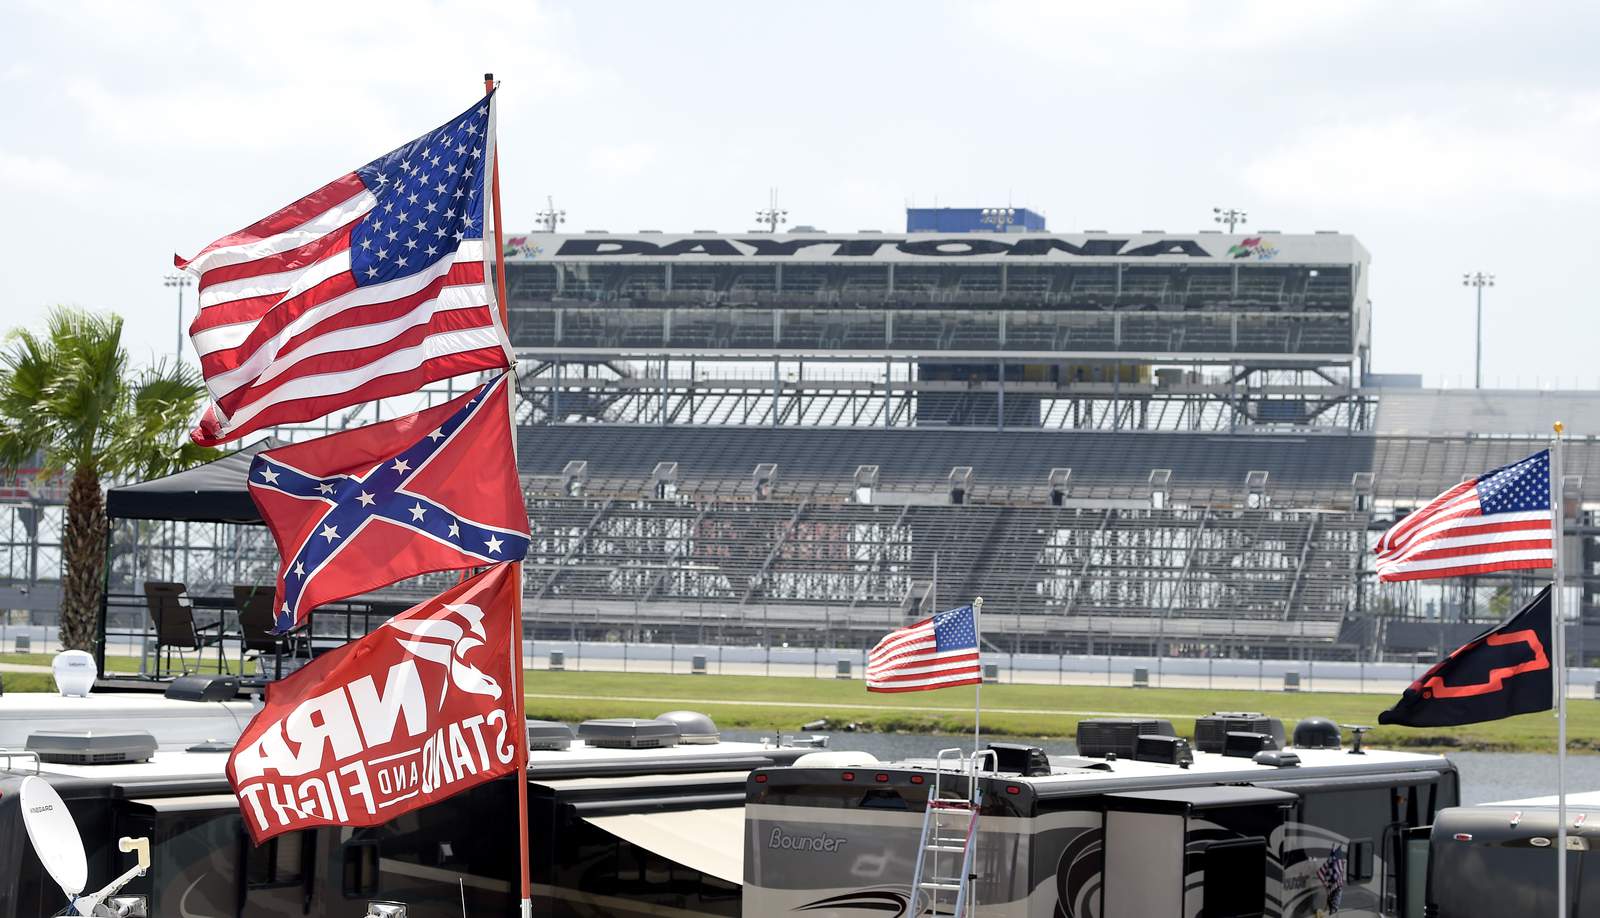 Breaking with tradition, NASCAR bans Confederate flag at events